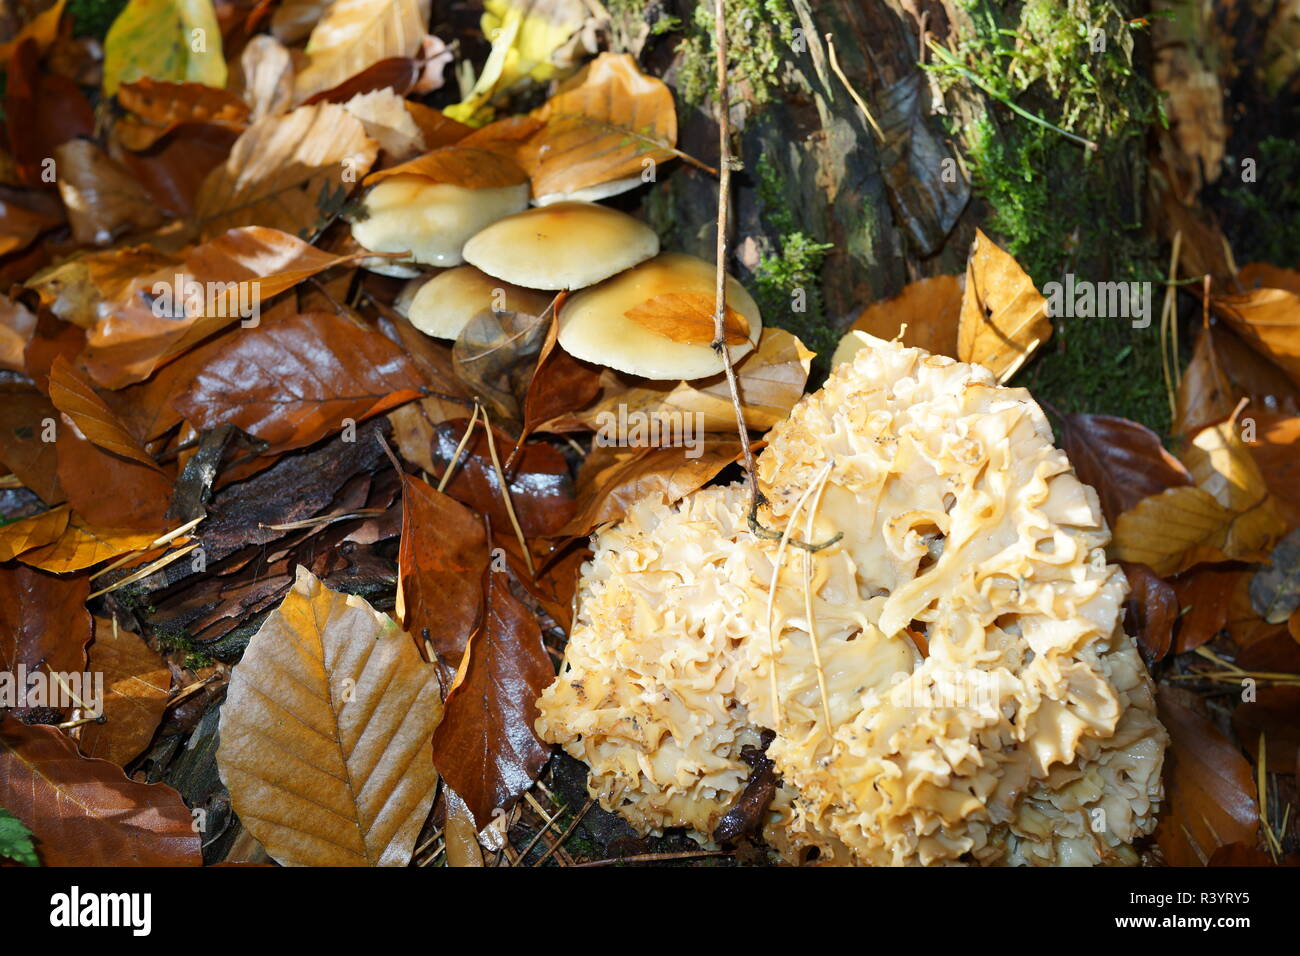 Cauliflower fungus and other mushrooms on rotten wood Stock Photo